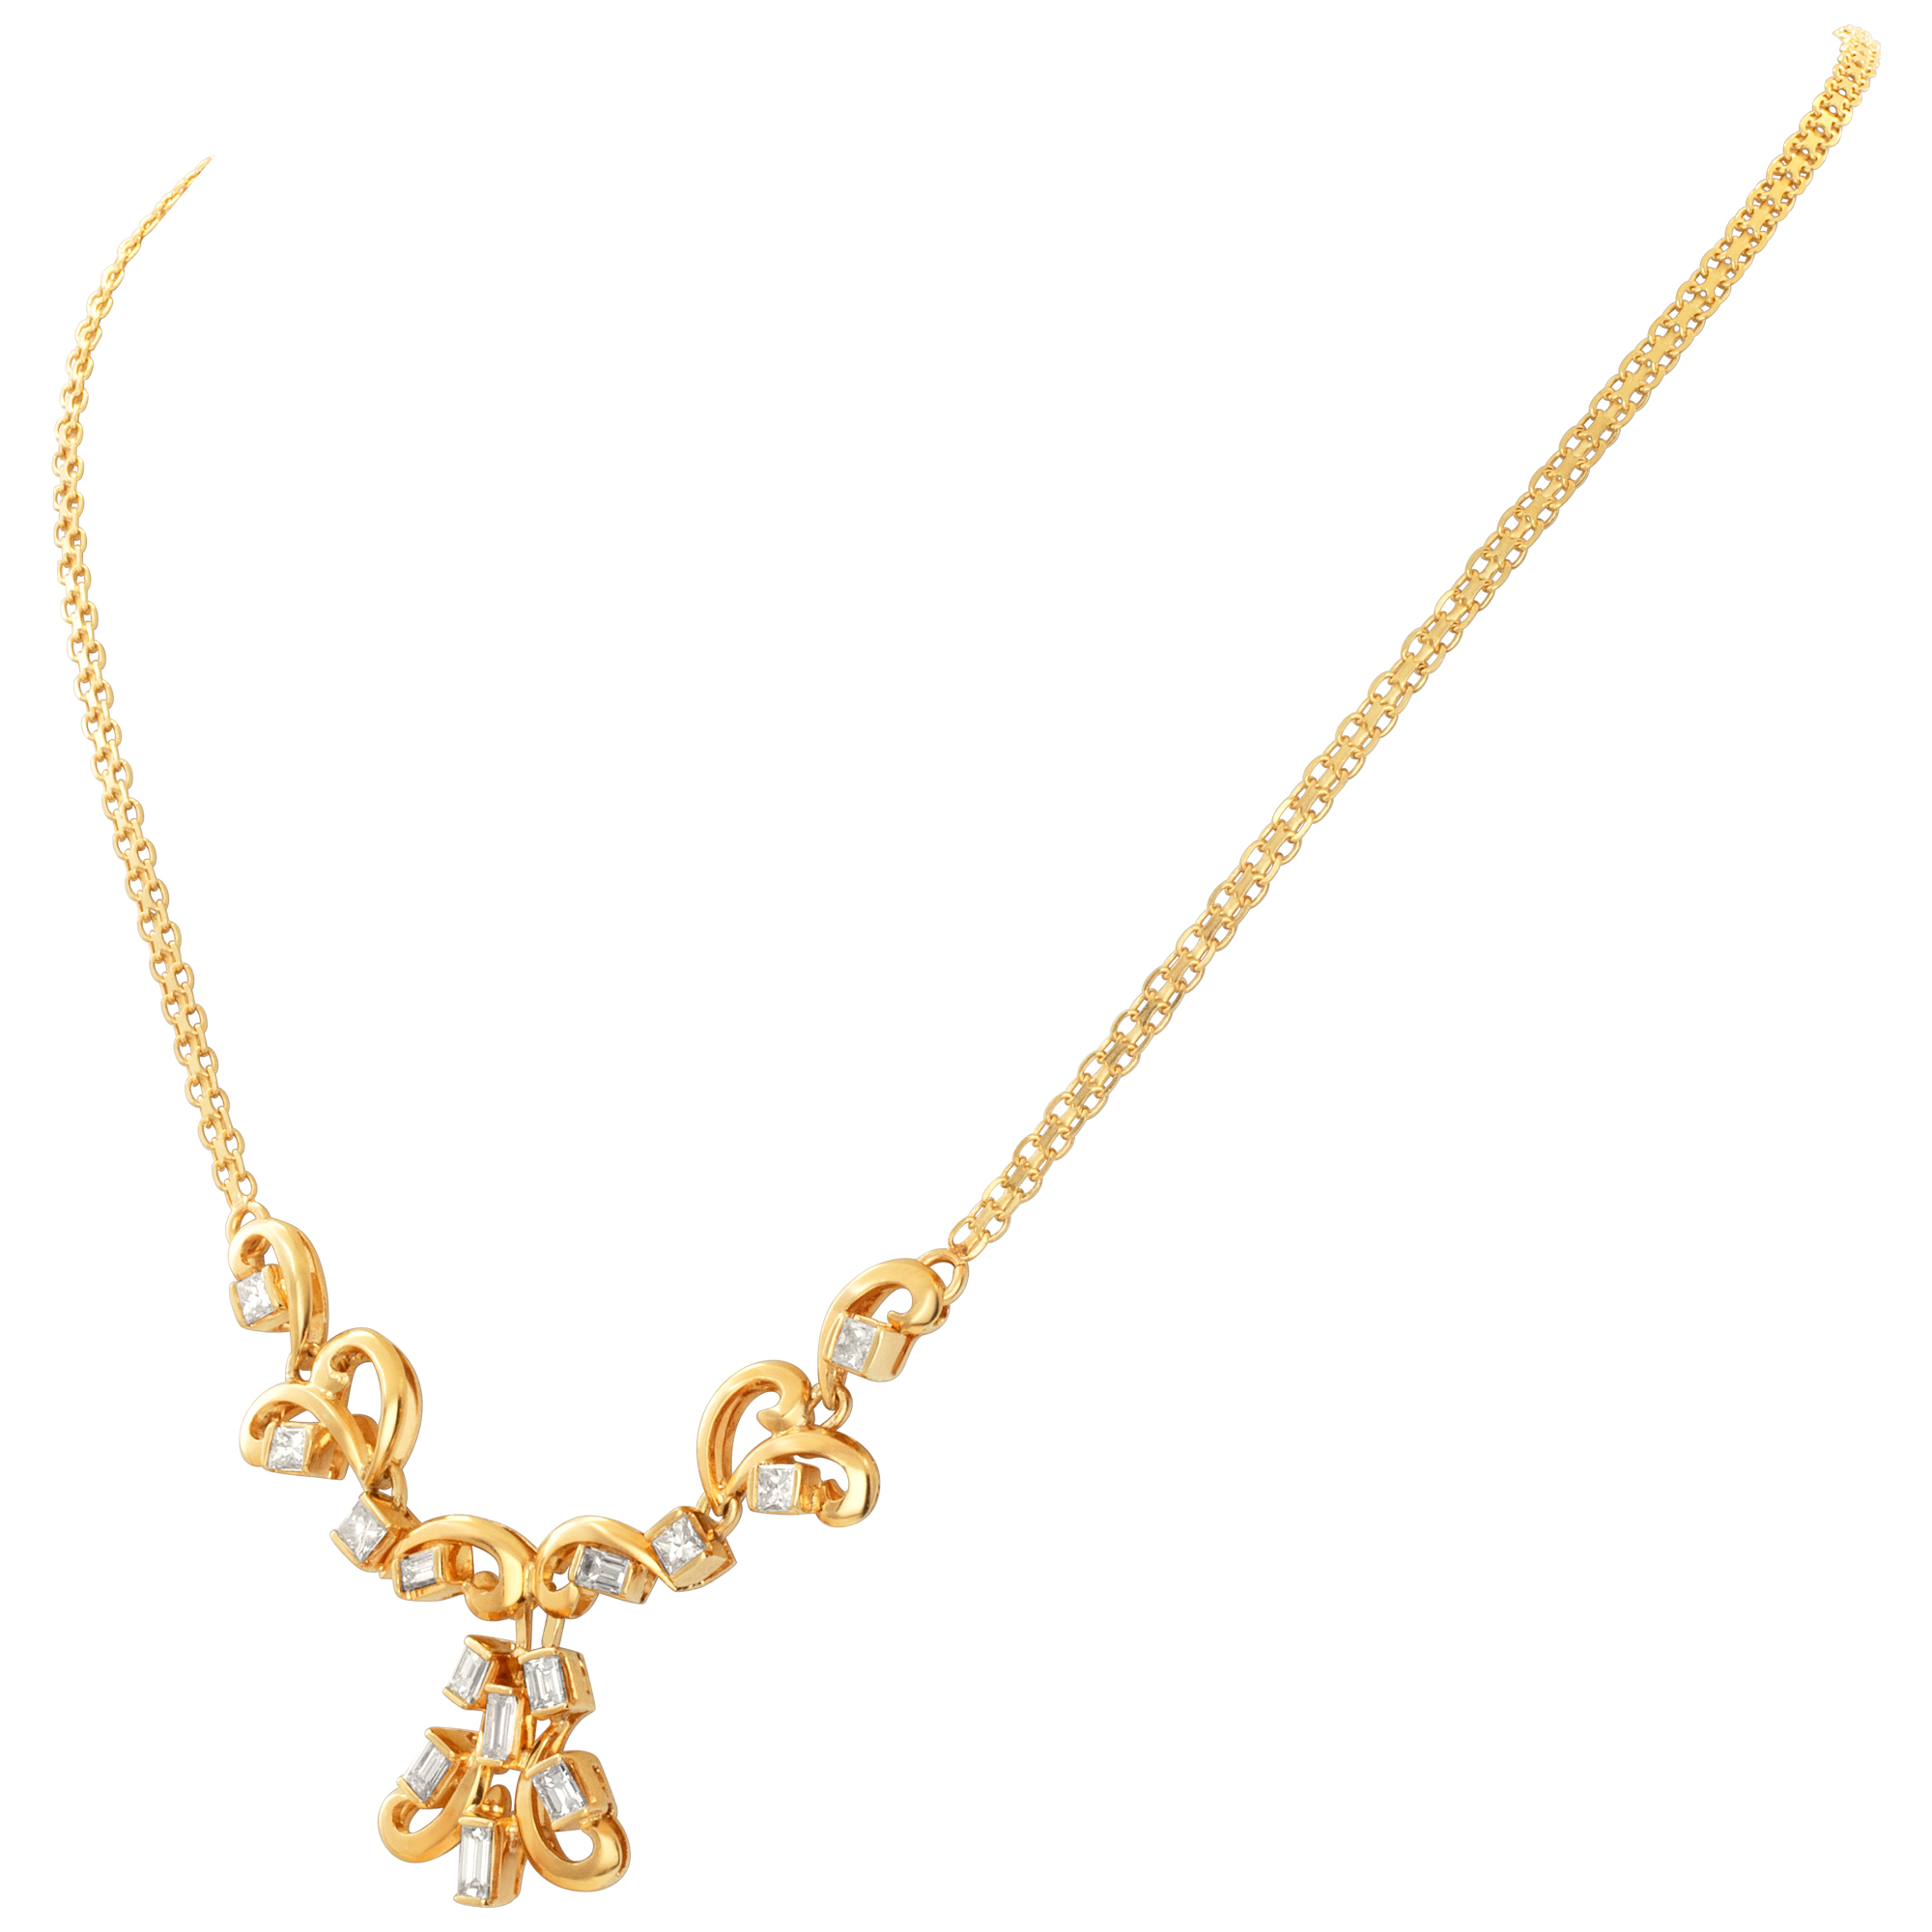 Swirl diamond necklace in 18k yellow gold with over 2 carats image 4